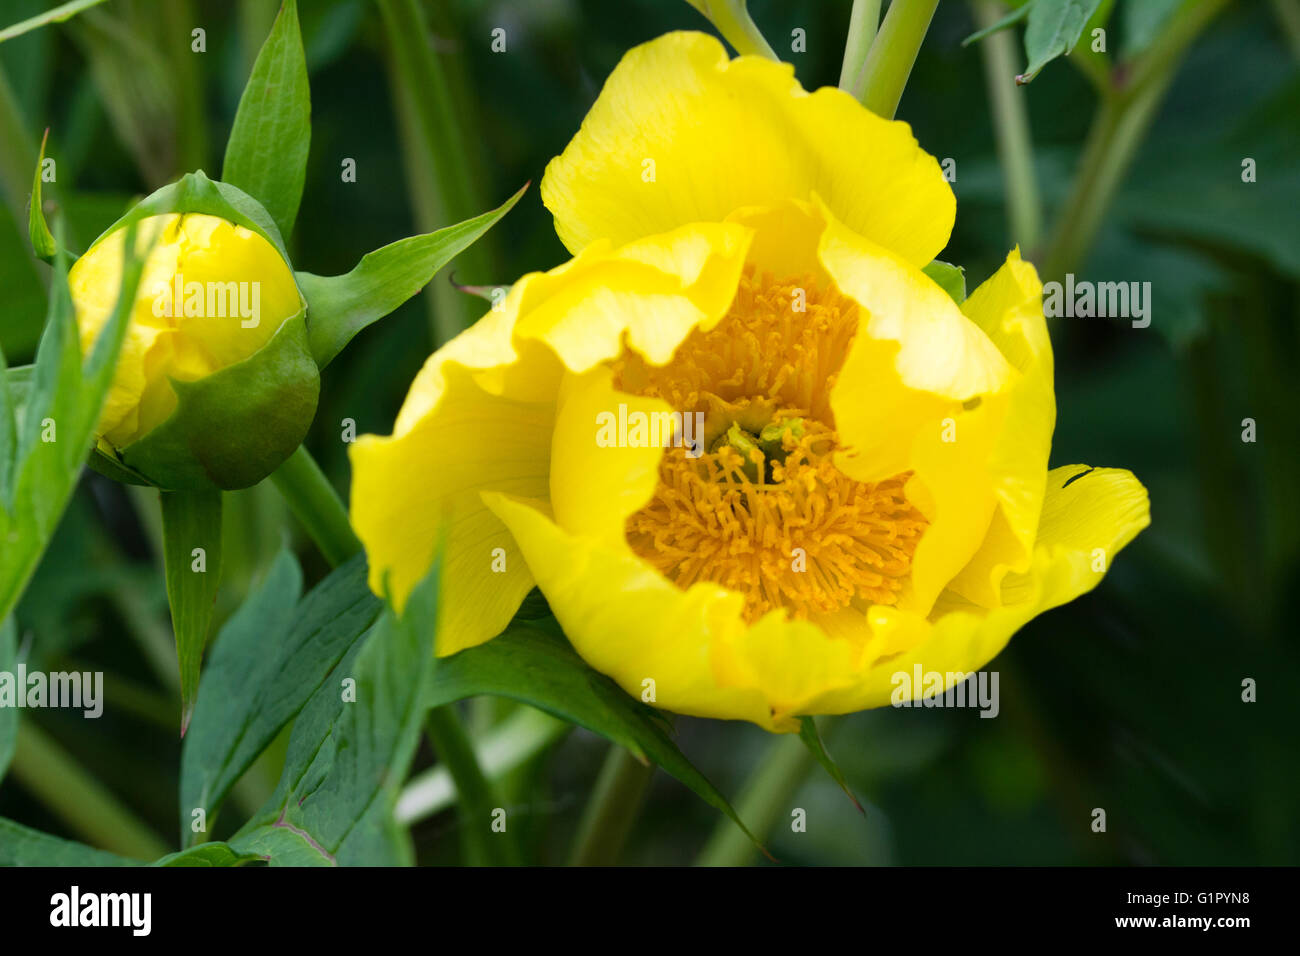 Yellow flowers of the architectural tree peony, Paeonia ludlowii Stock Photo